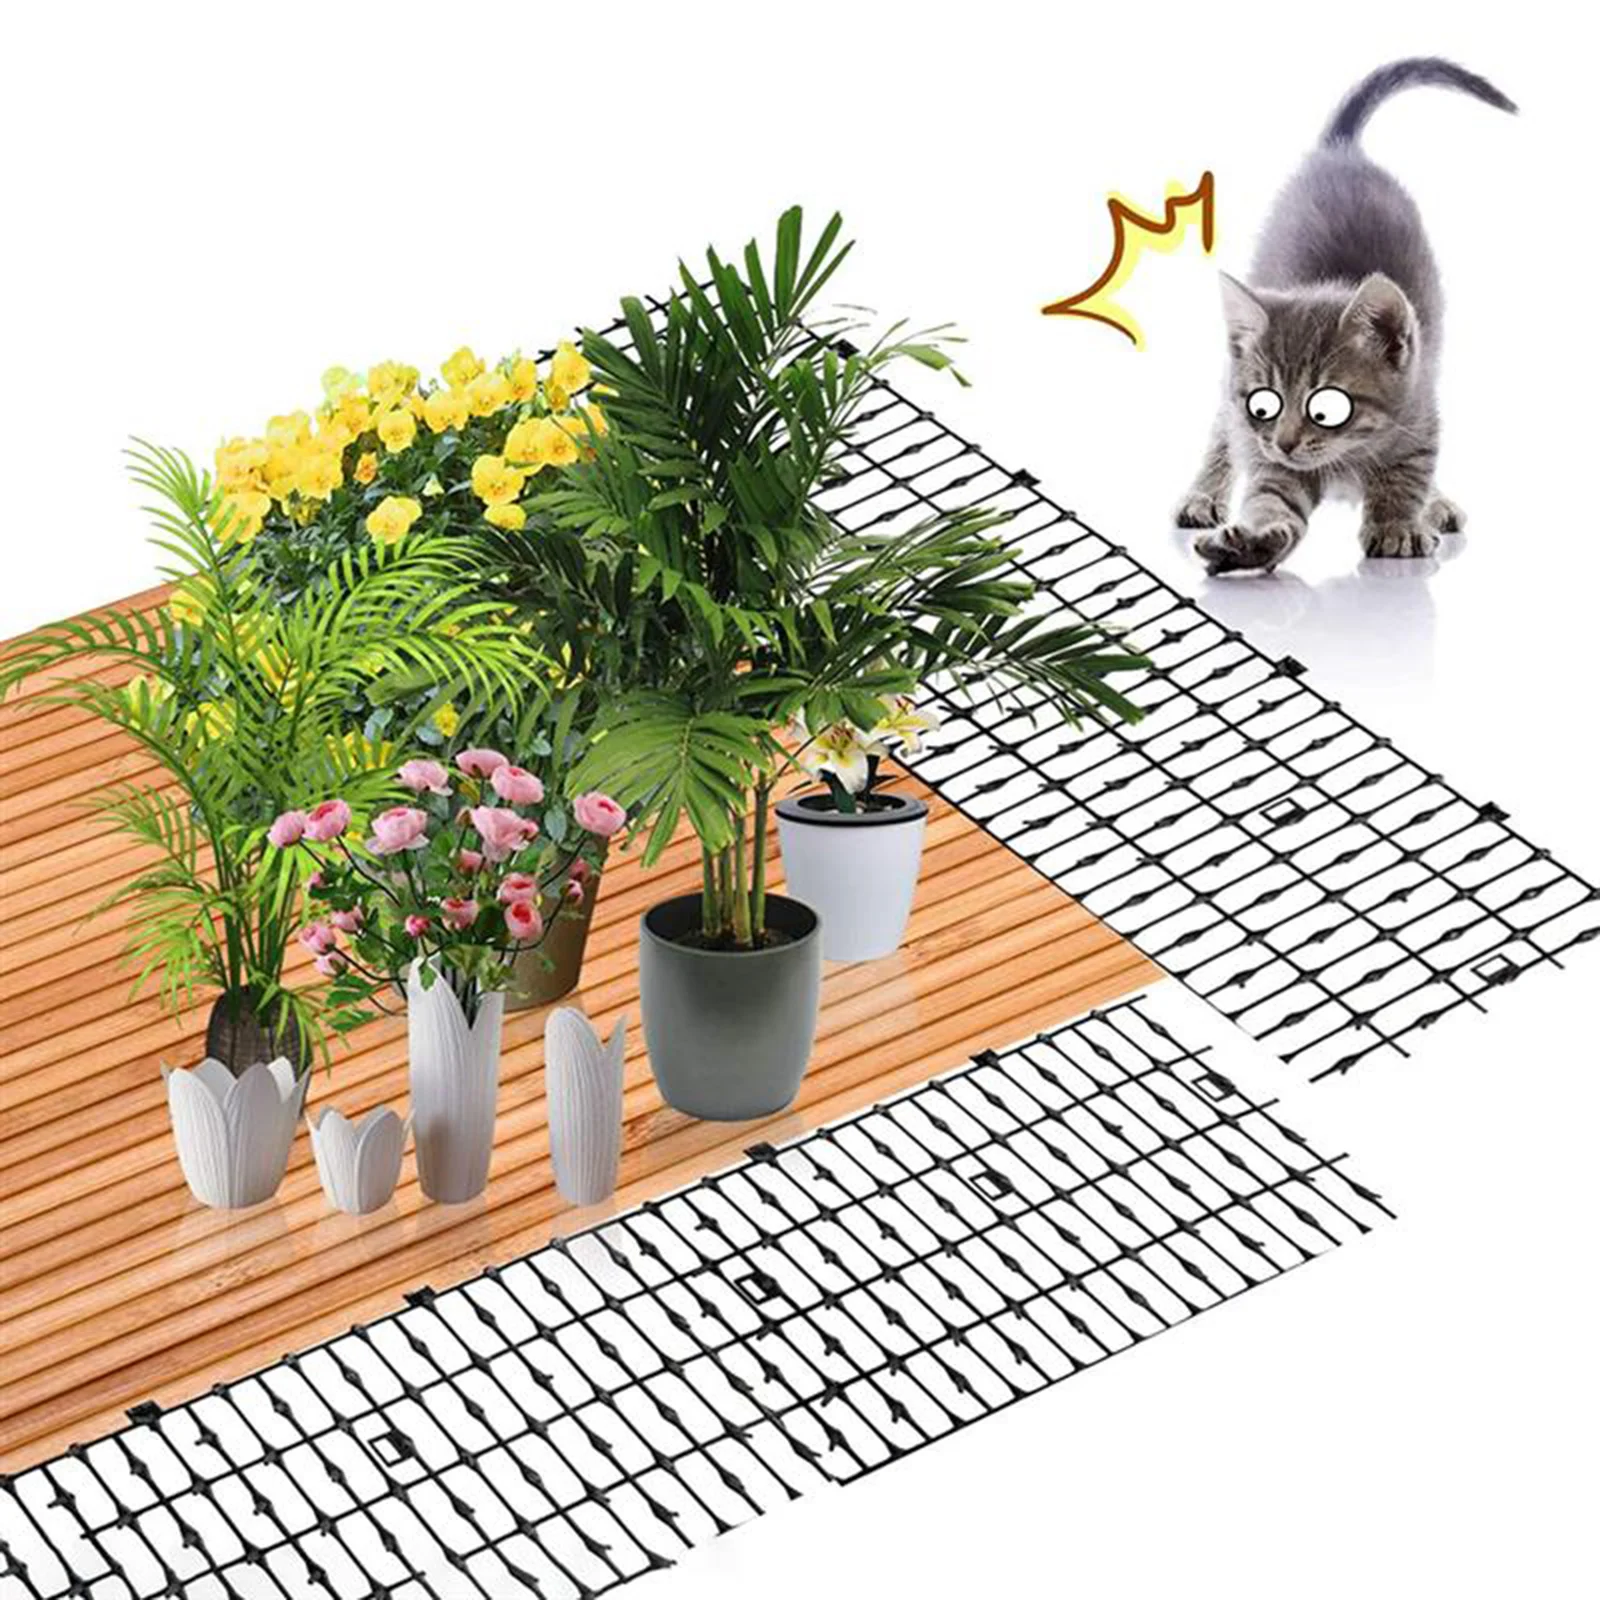 Cats Scat Mat Prickle Strips Stopper Deterrent Mats with 1 Inch Plastic Spikes Outdoor Garden Pest Control Anti-Cats